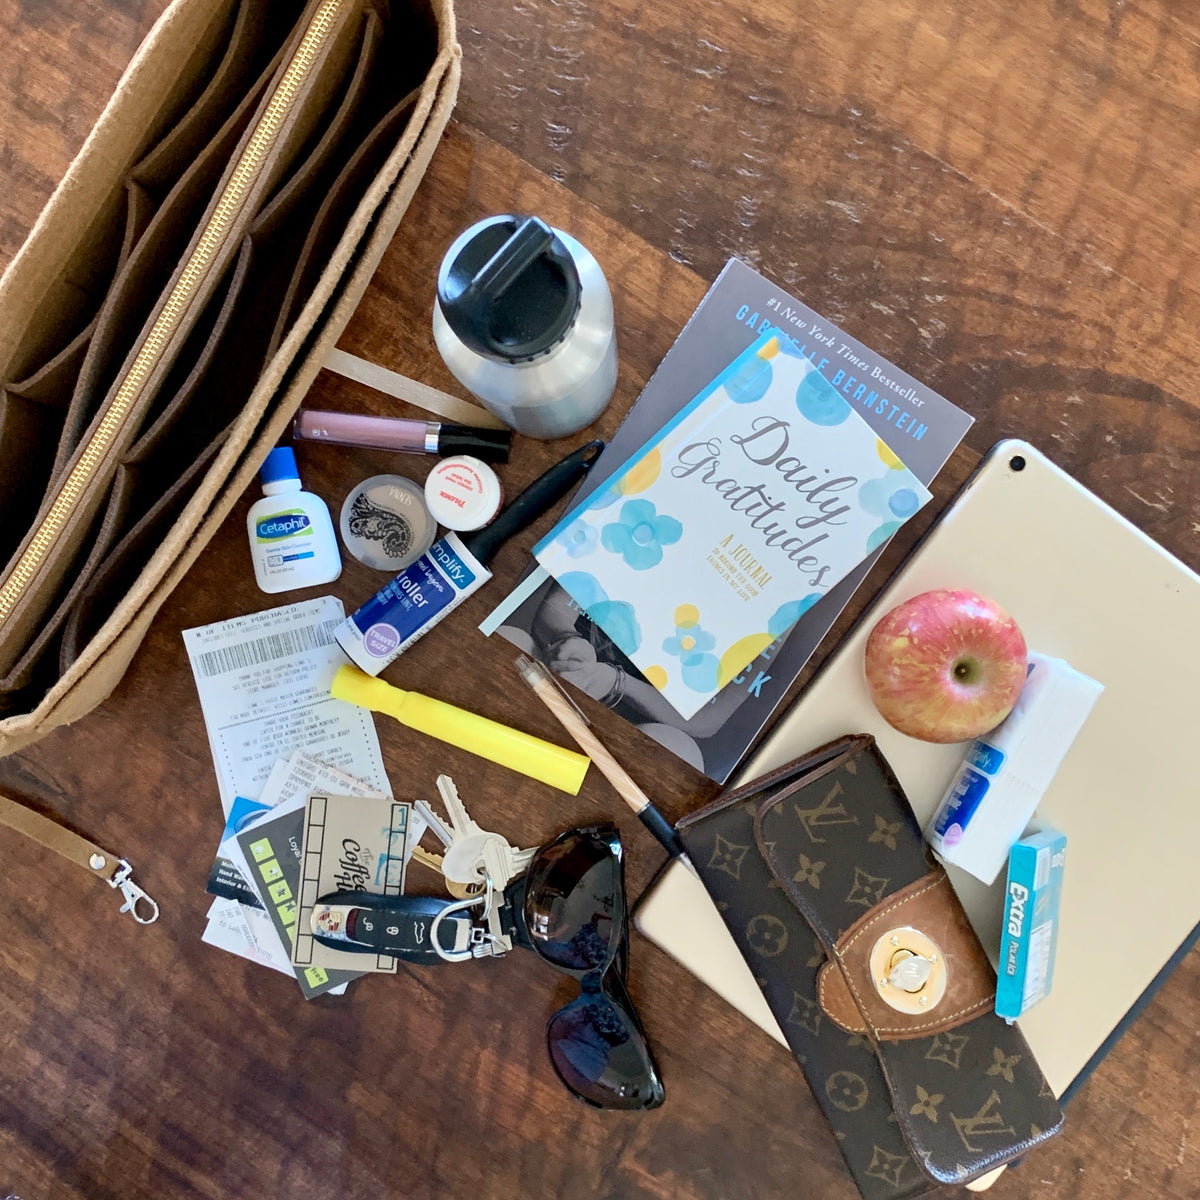 A purse organizer sits on a wooden table along with a wallet, iPad, apple, tissue, gum, pen, keys, lotion, aspirin, money, sunglasses and a journal at the ready to be organized. 